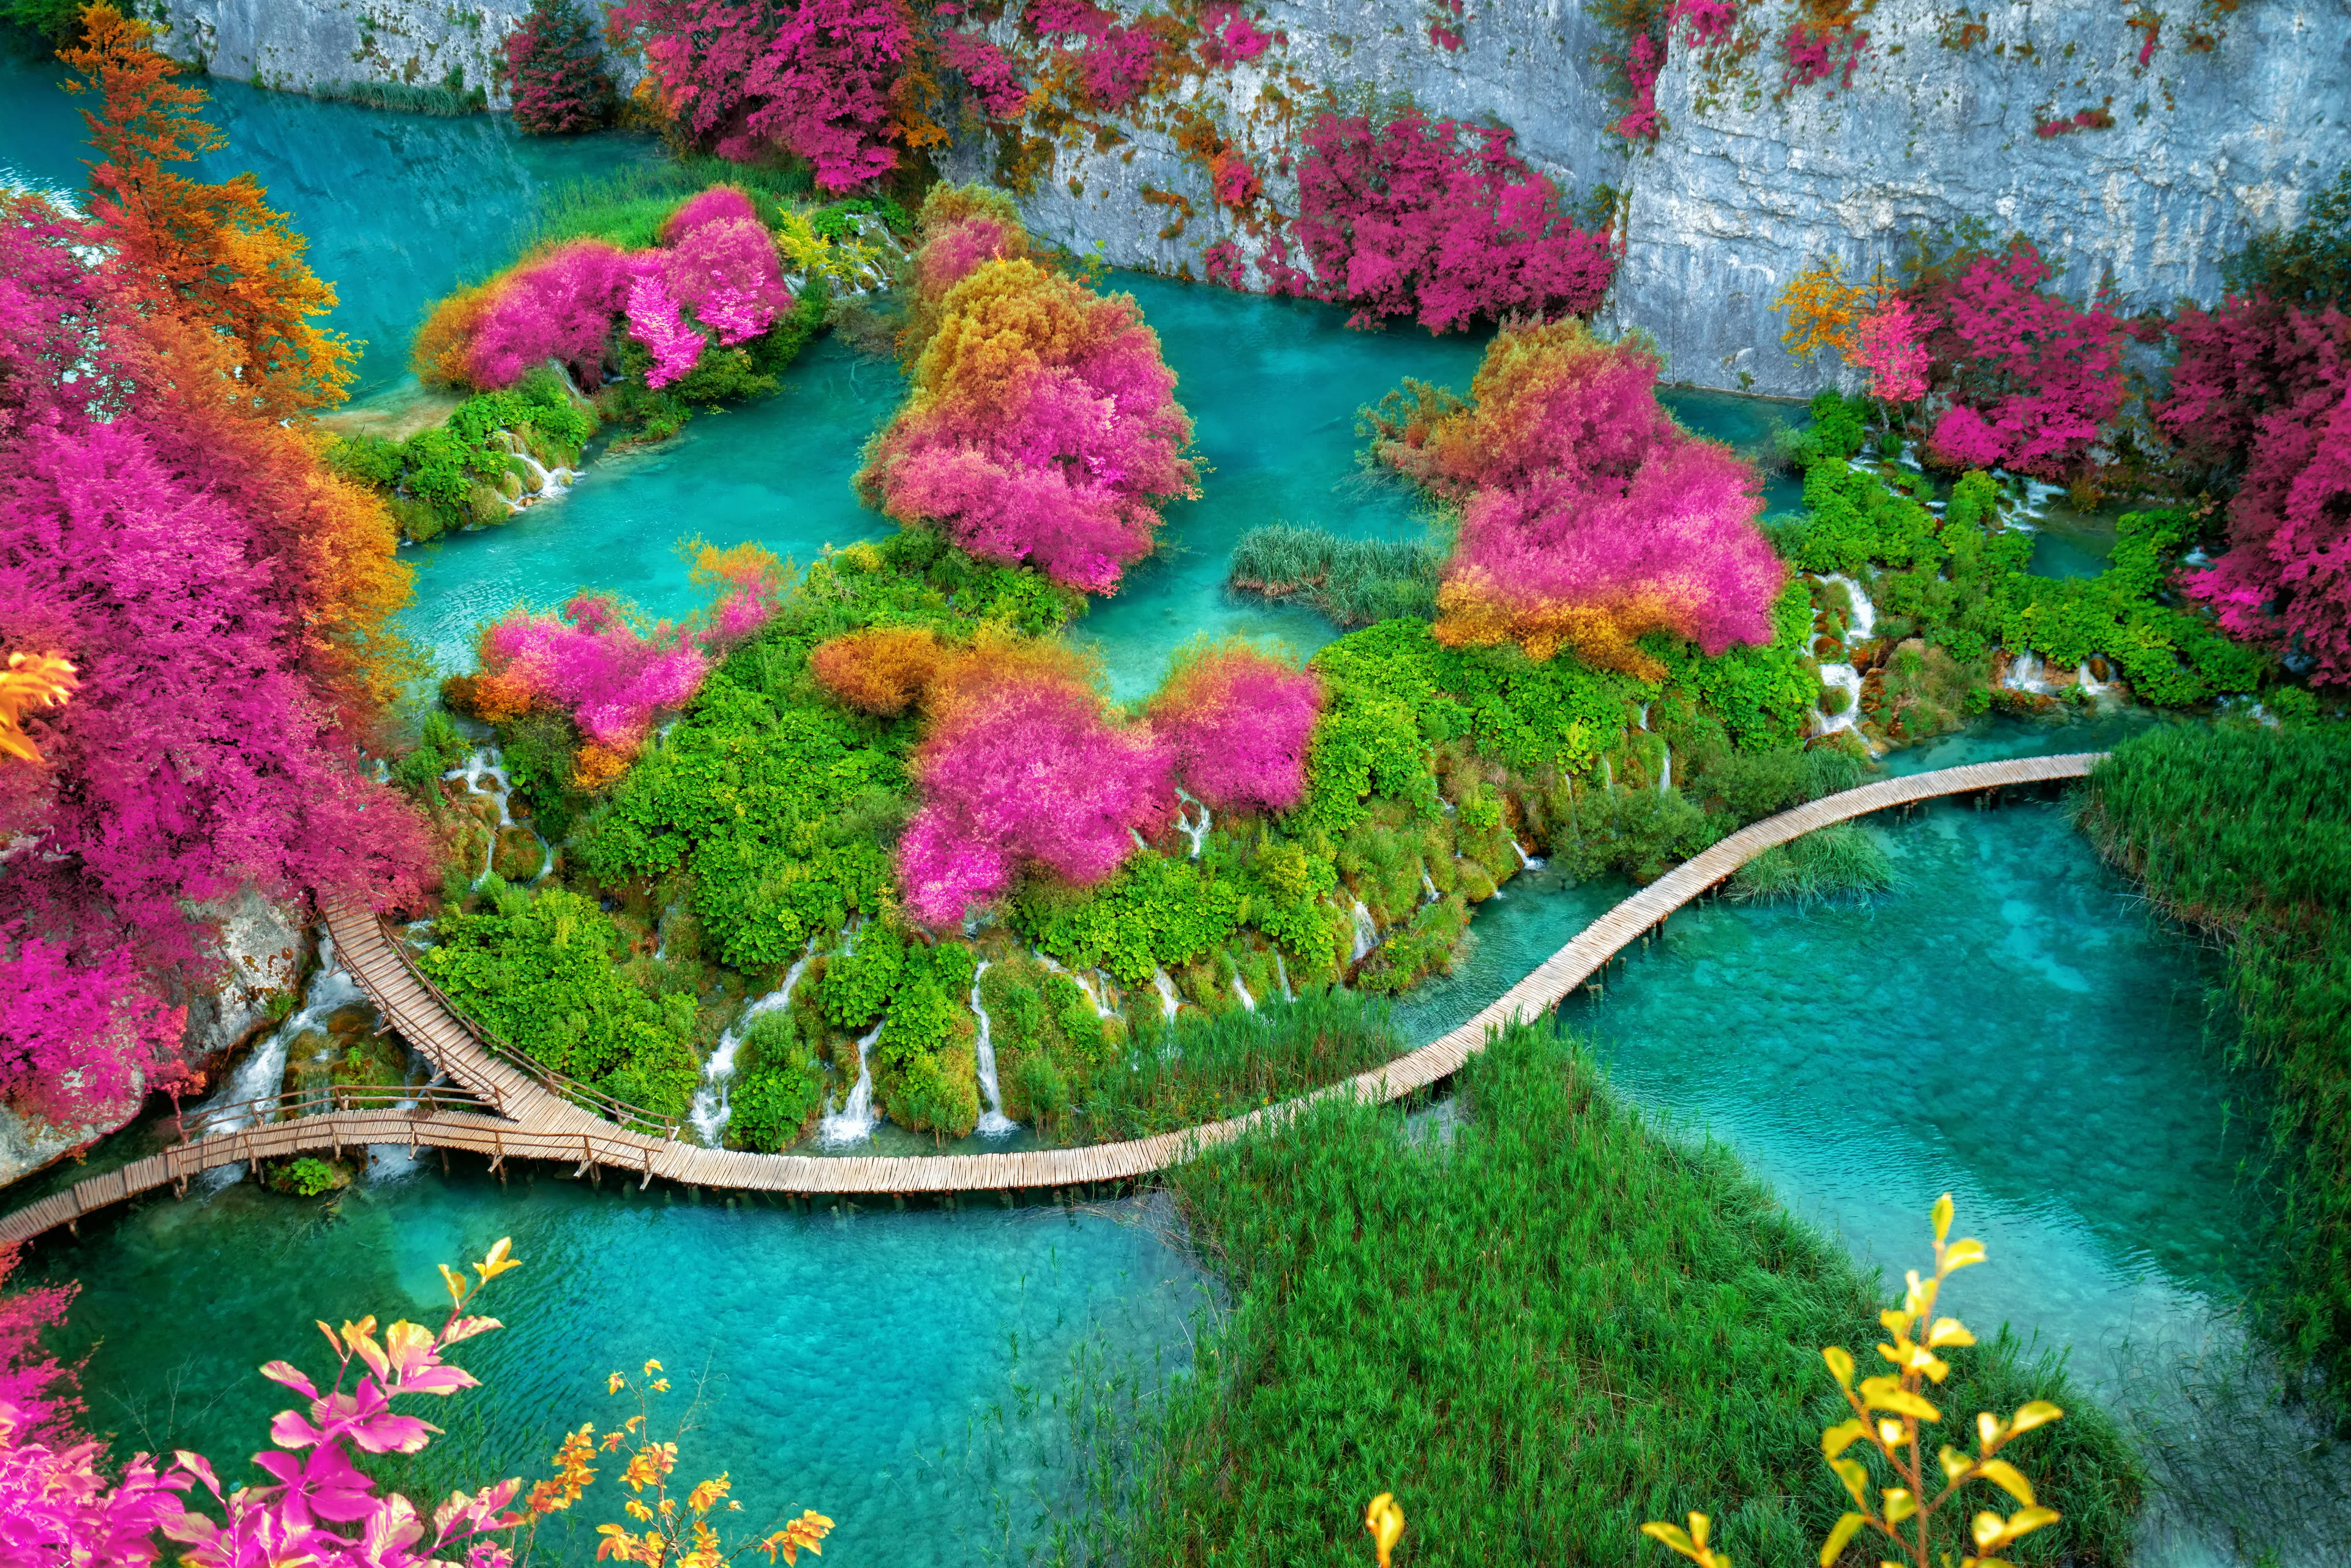 Explore Plitvice Lakes National Park, Croatia in One Day